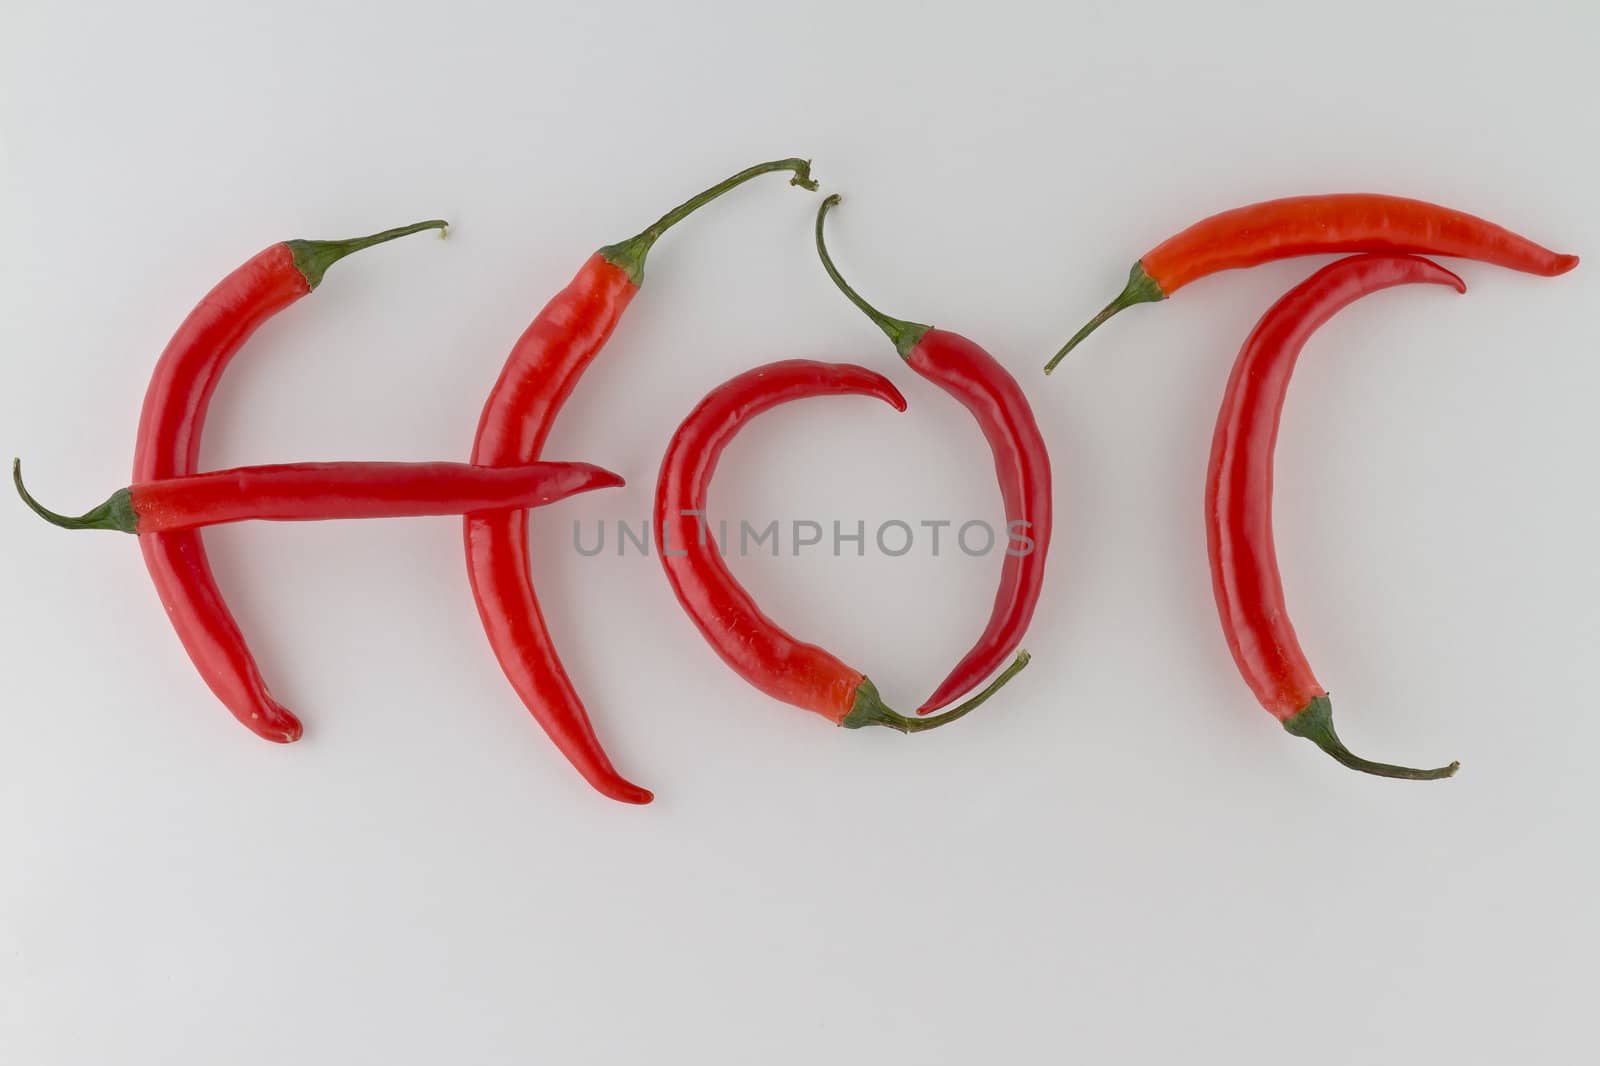 Red hot chili peppers arranged as the word HOT on white background